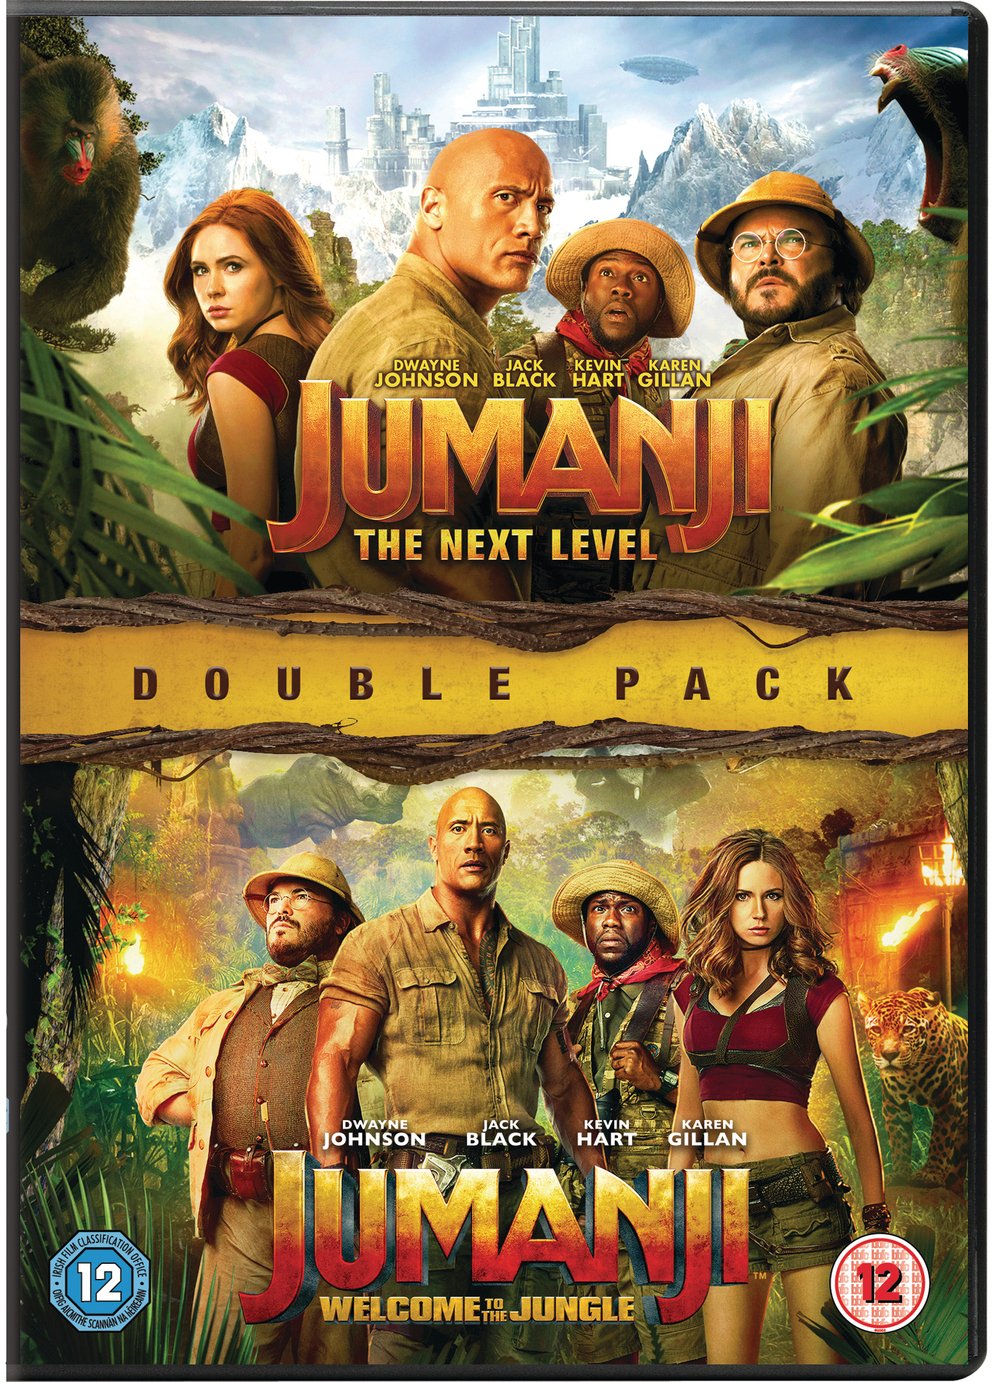 Jumanji: Welcome to the Jungle & The Next Level DVD Box Set Review